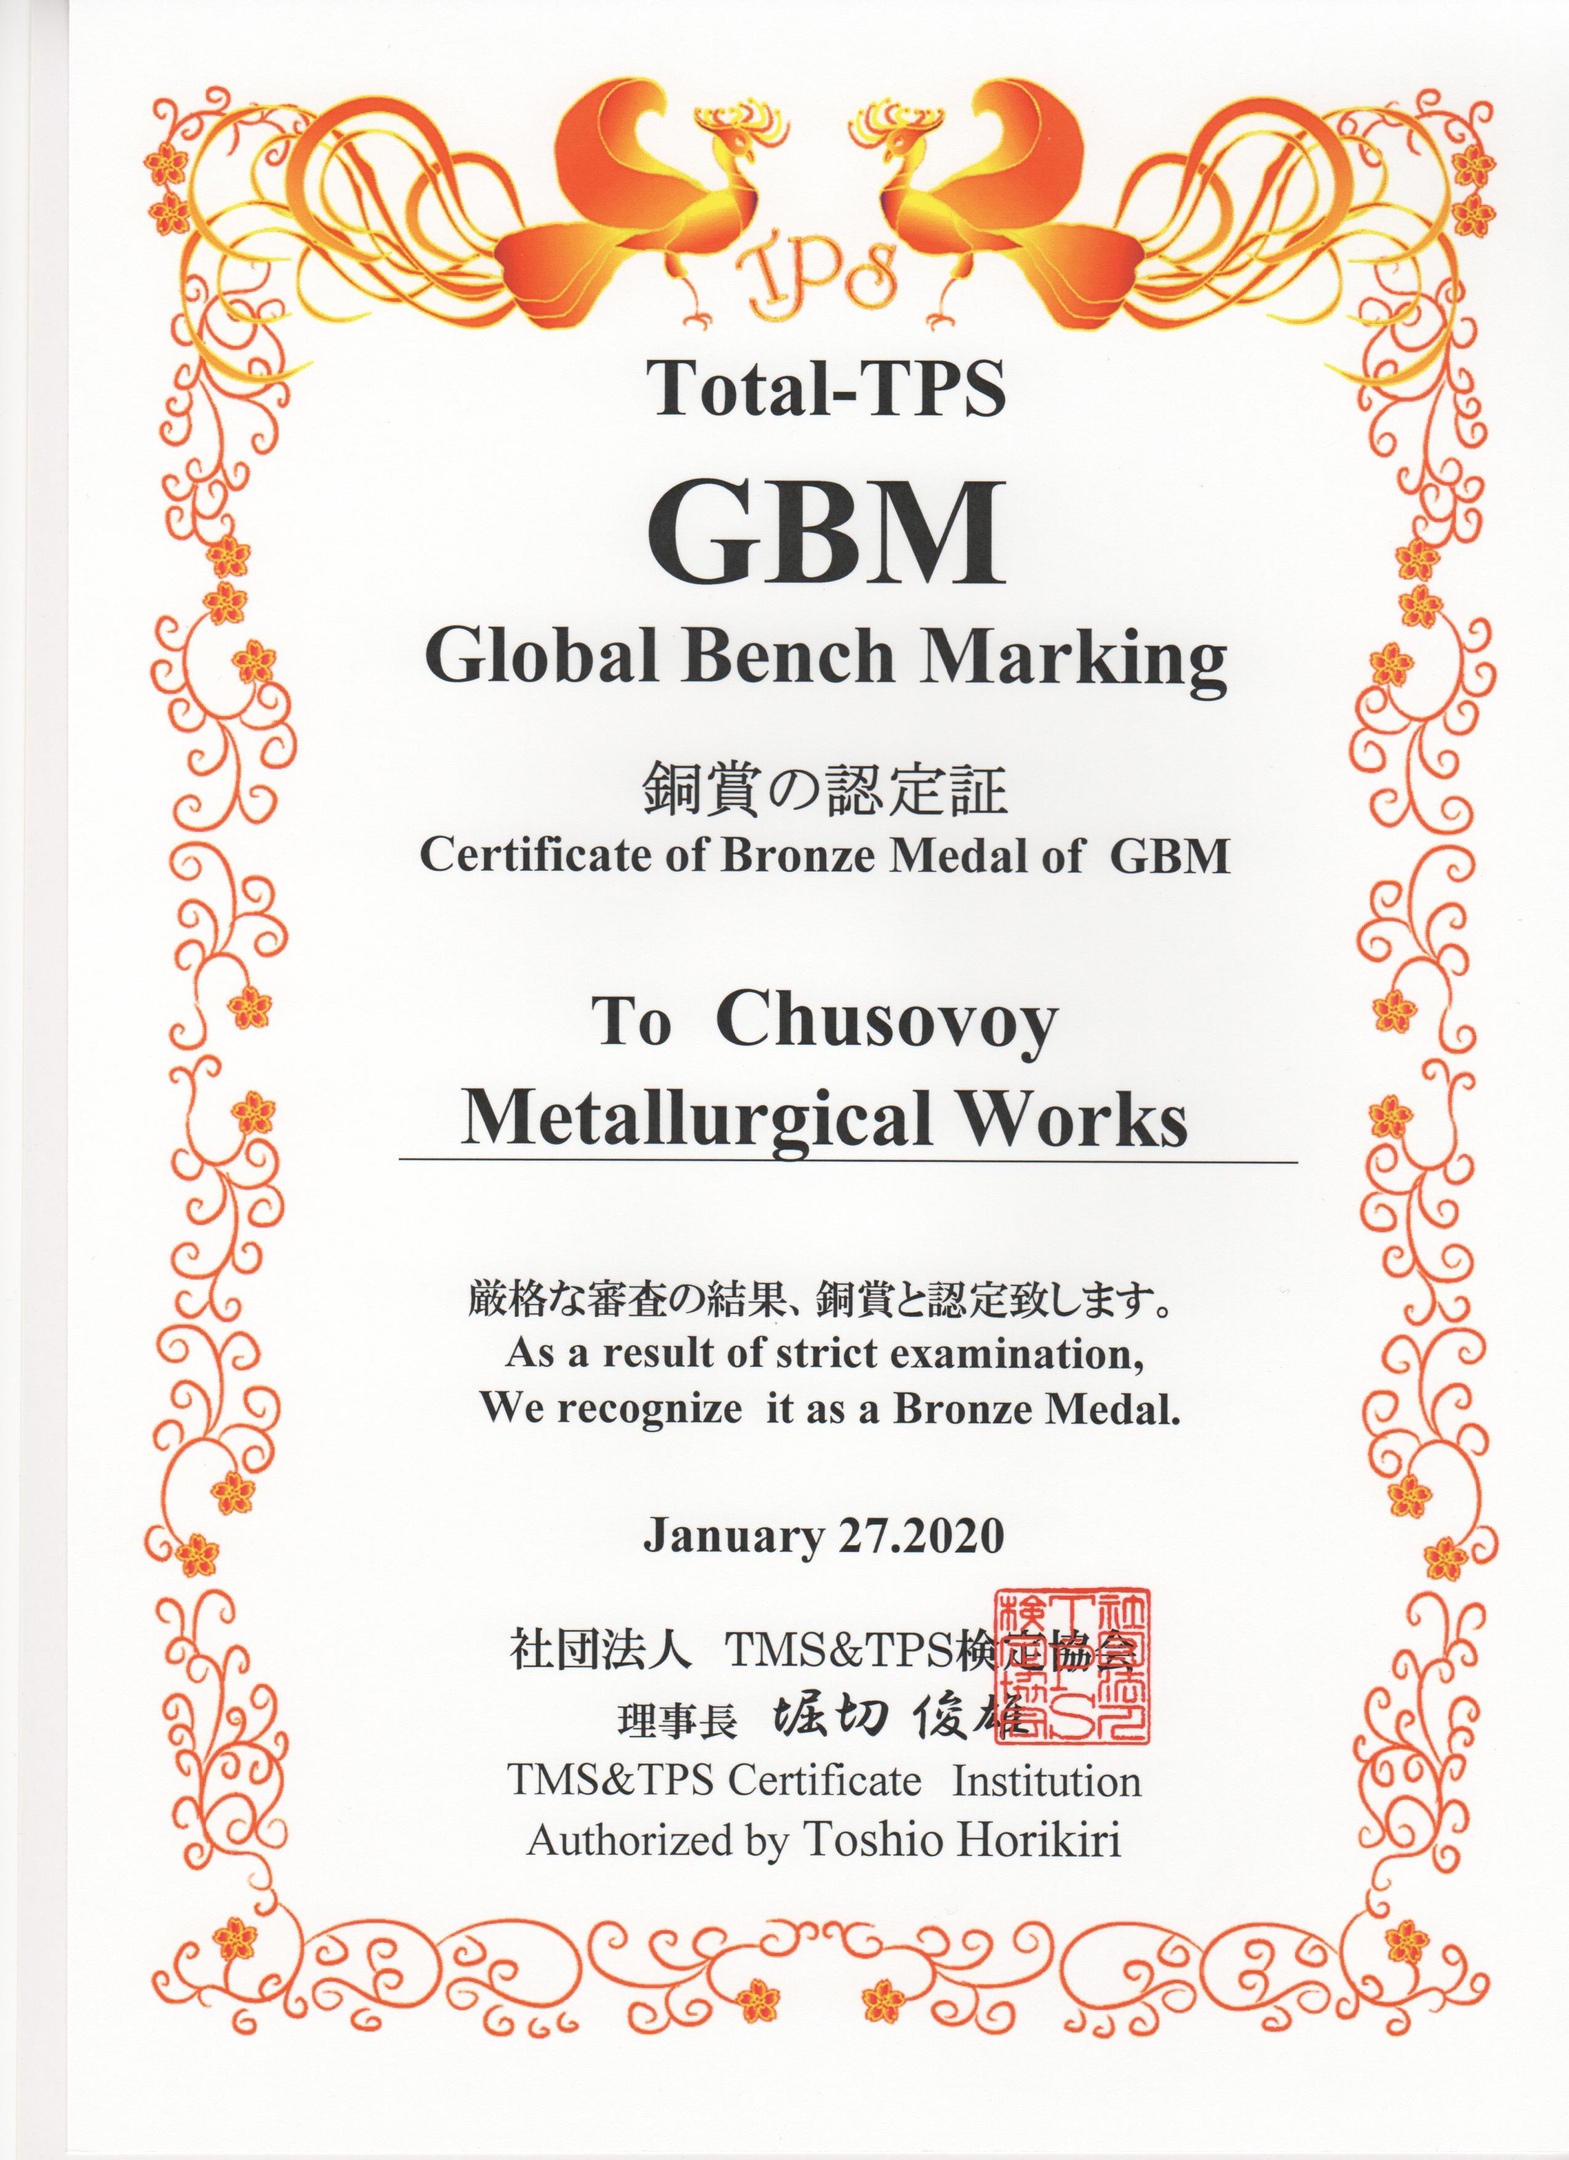 Certificate of Bronze Medal of GMB